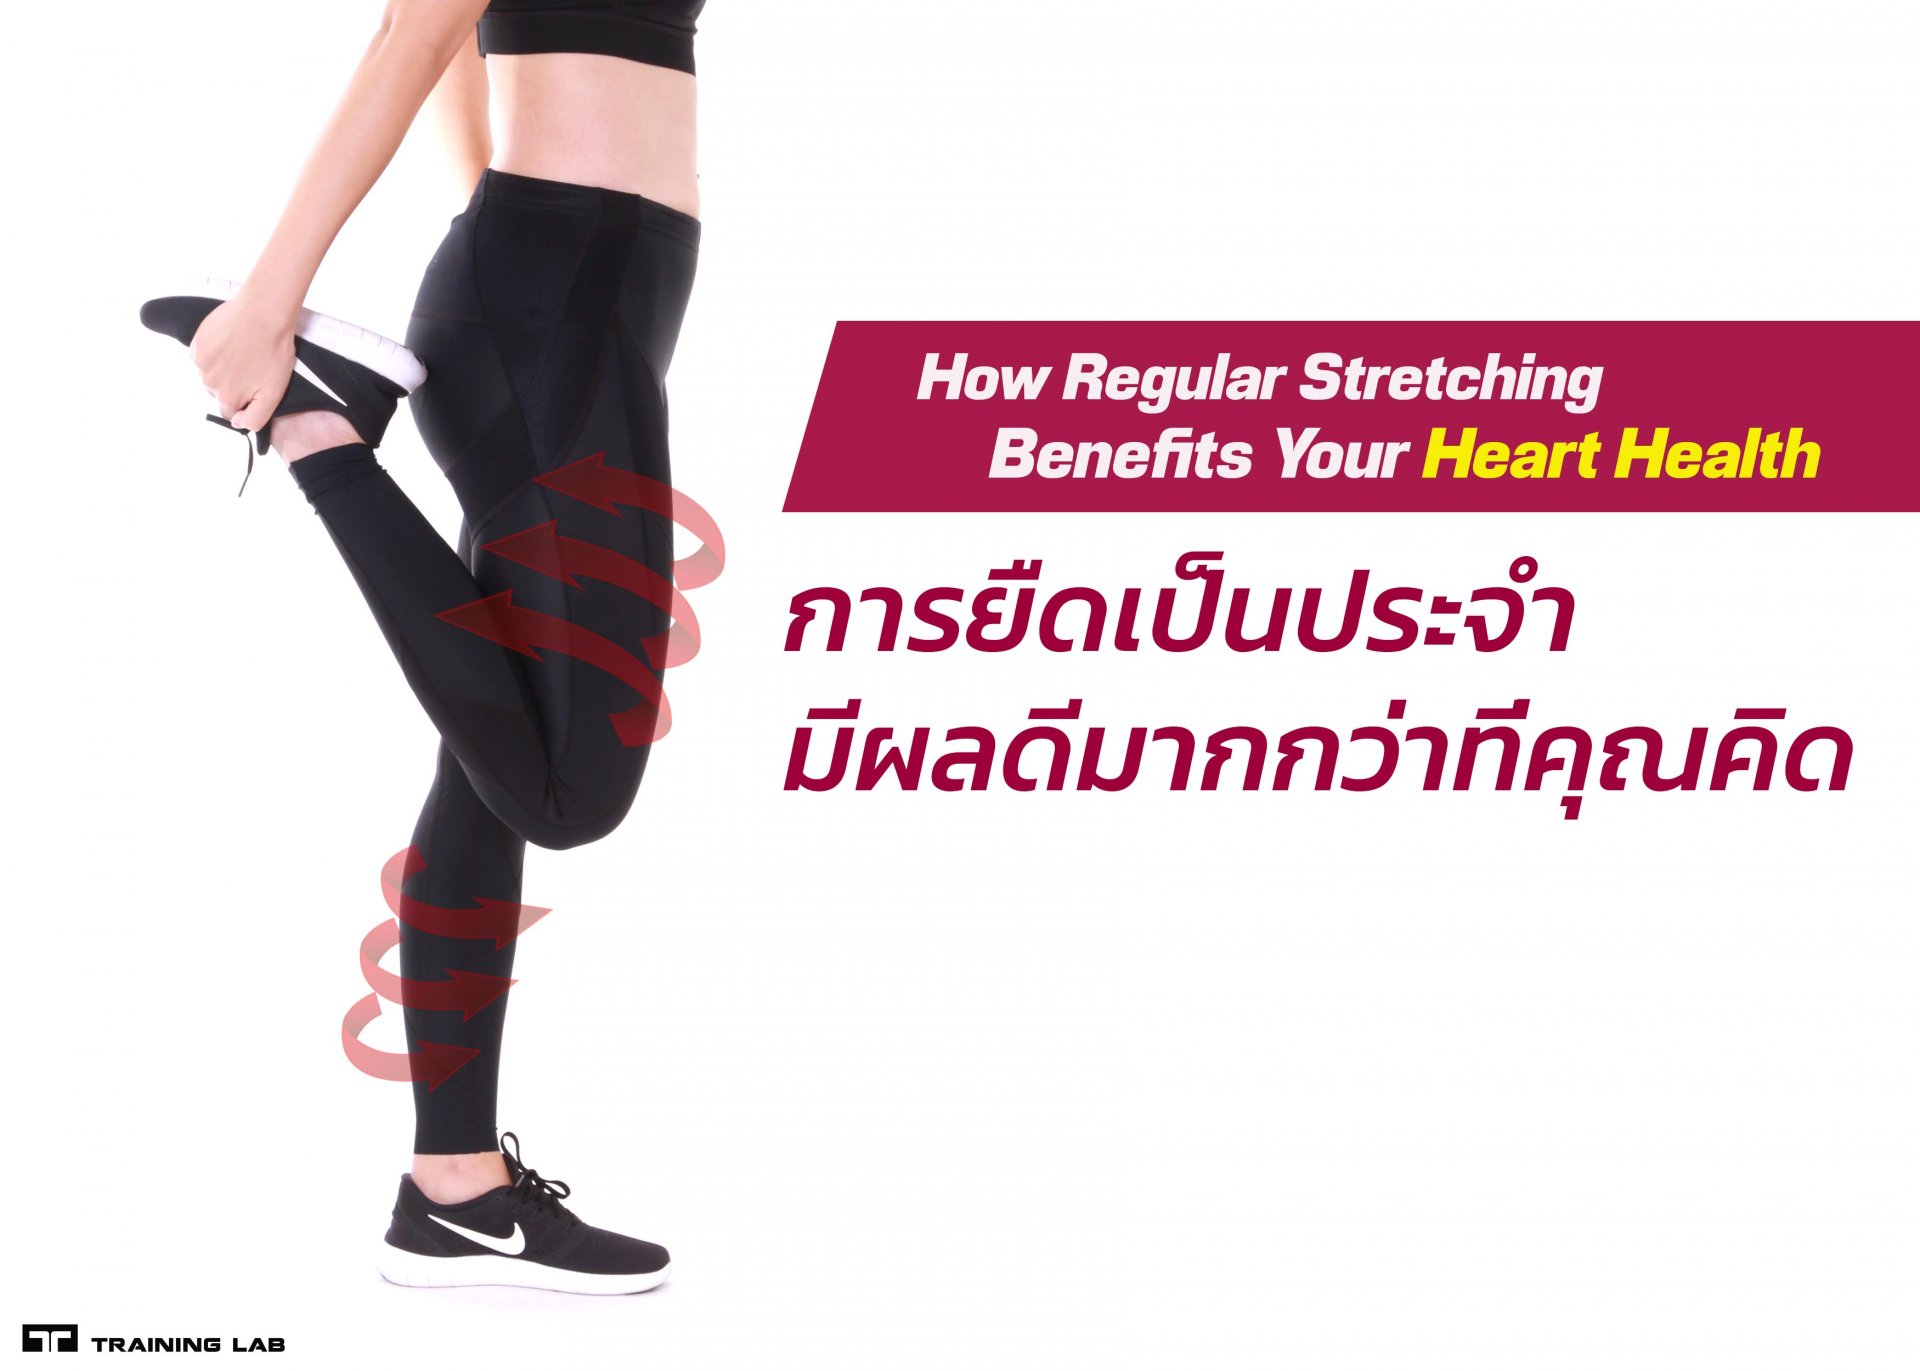 How Regular Stretching Benefits Your Heart Health